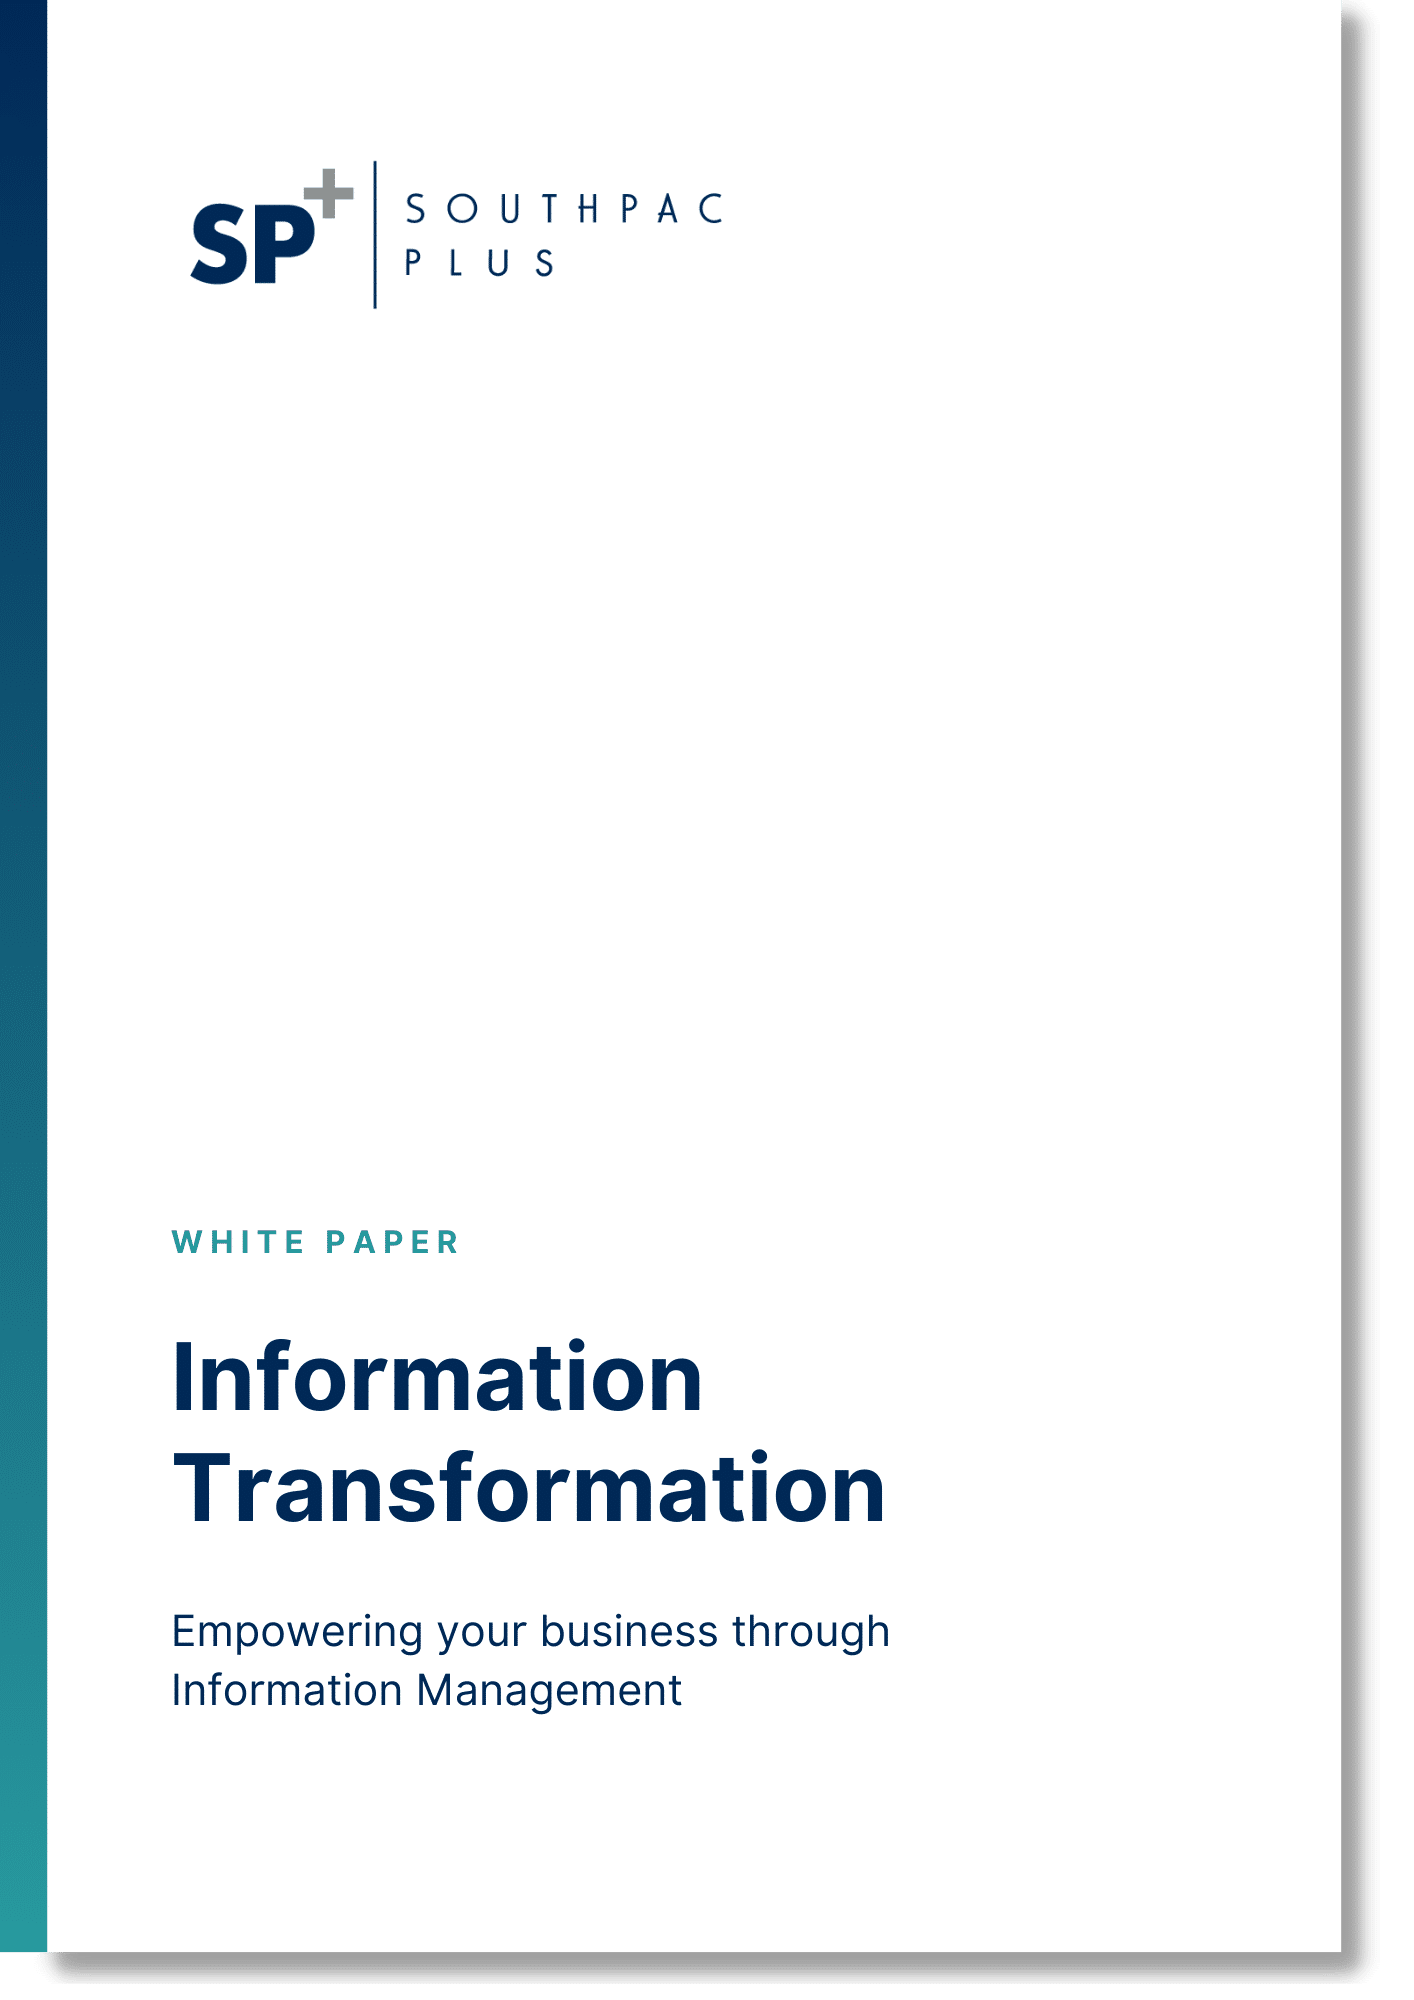 Southpac Plus provides a white paper on information transformation and empowering businesses through information management.